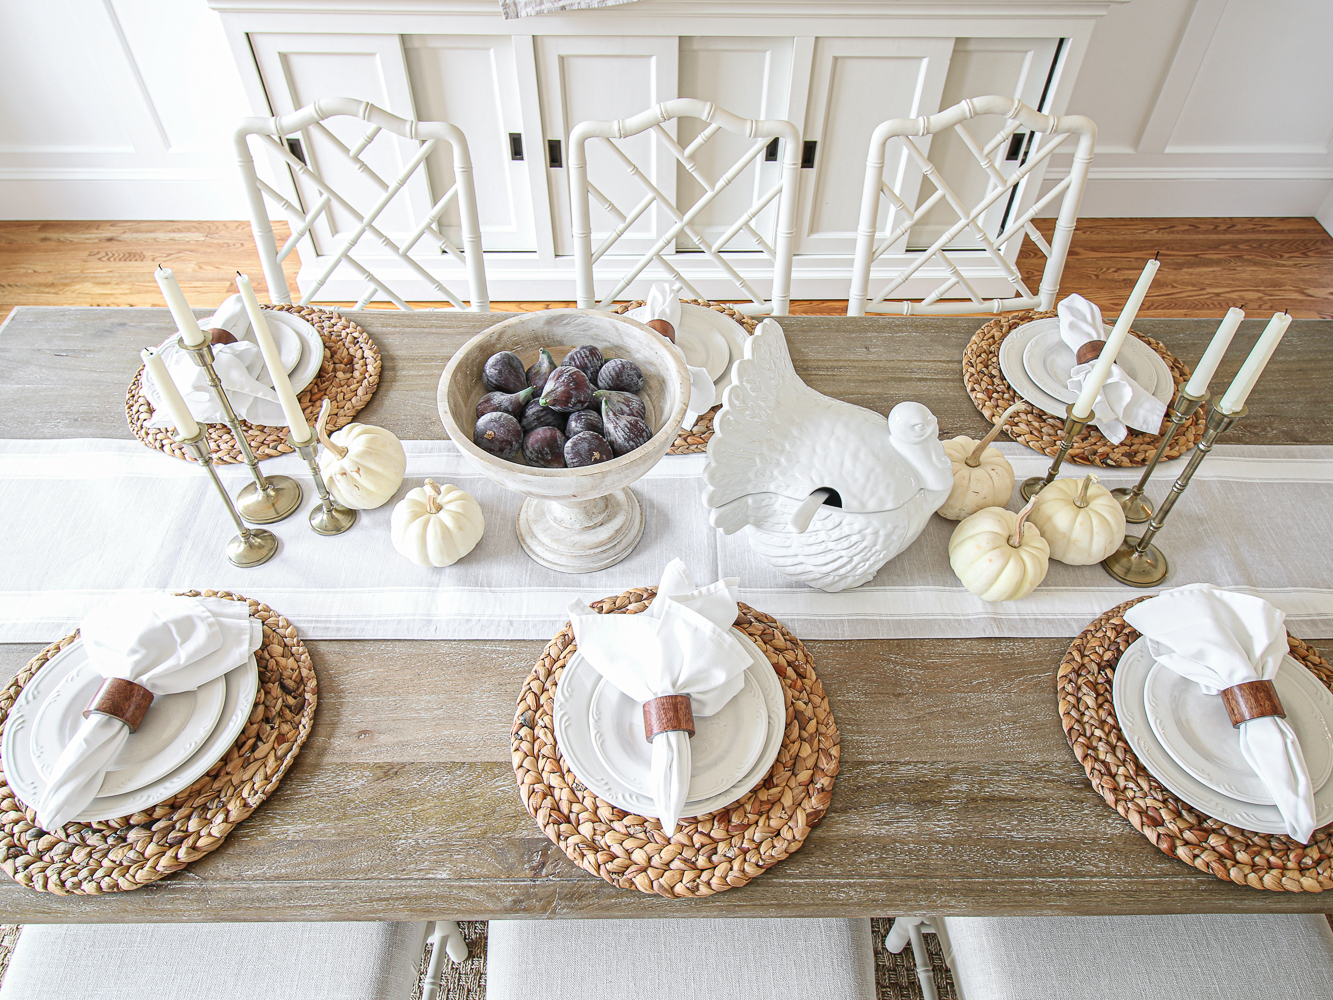 Thanksgiving table with white and neutral decor, turkey tureen, rectangle table, white dinnerware and napkins on top of woven chargers, white pumpkins, chippendale chairs, candles